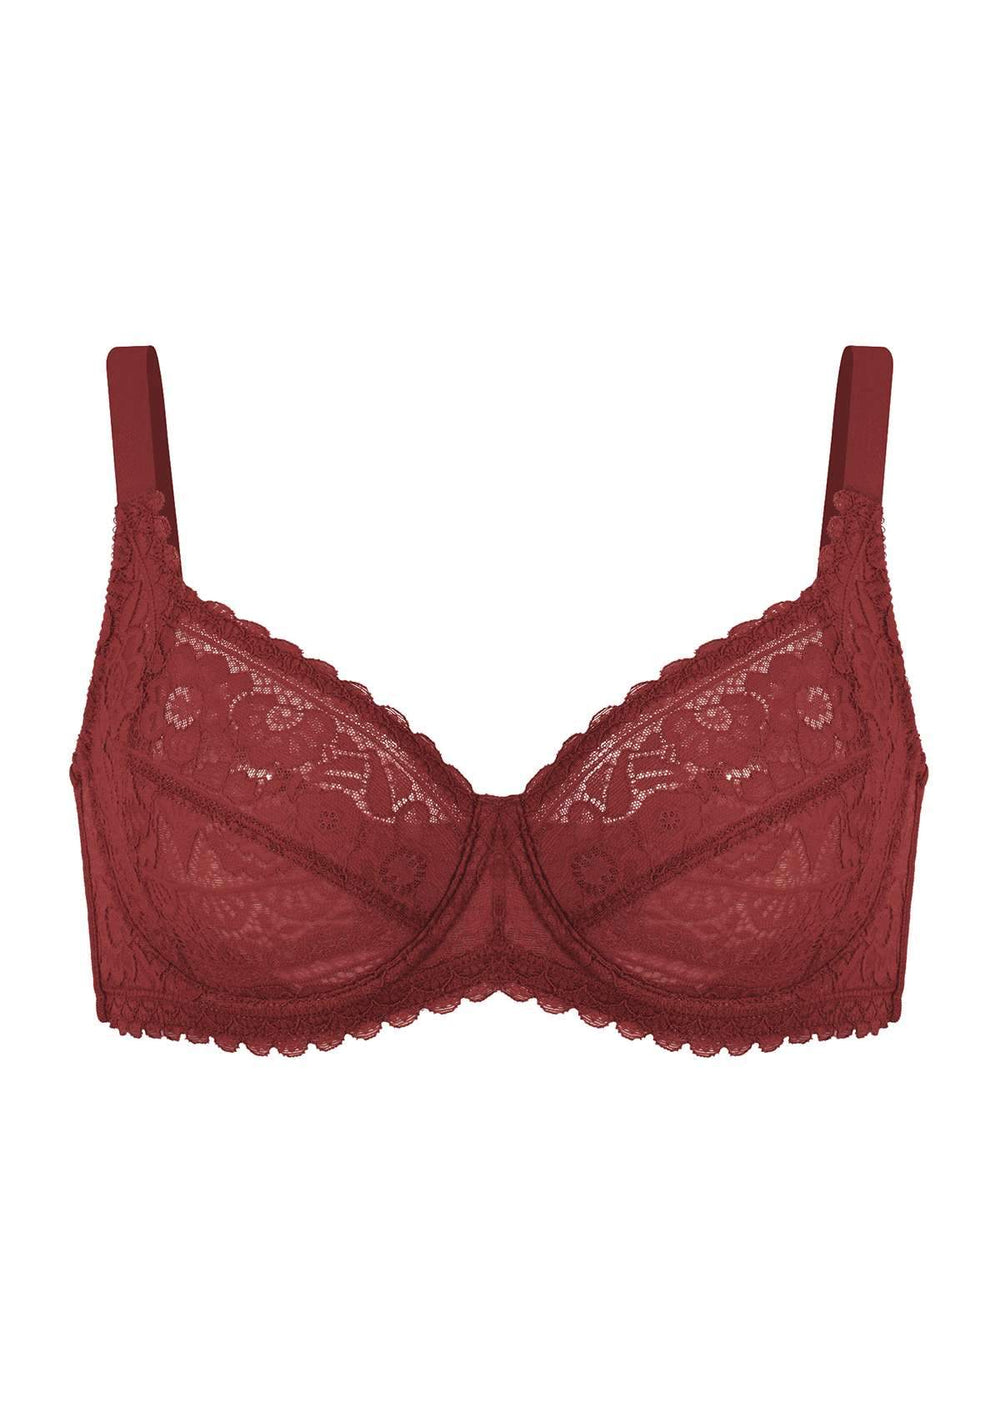 Travel-Friendly Bras: Space-Saving and Quick-Drying Options, by Hsia  Lingerie